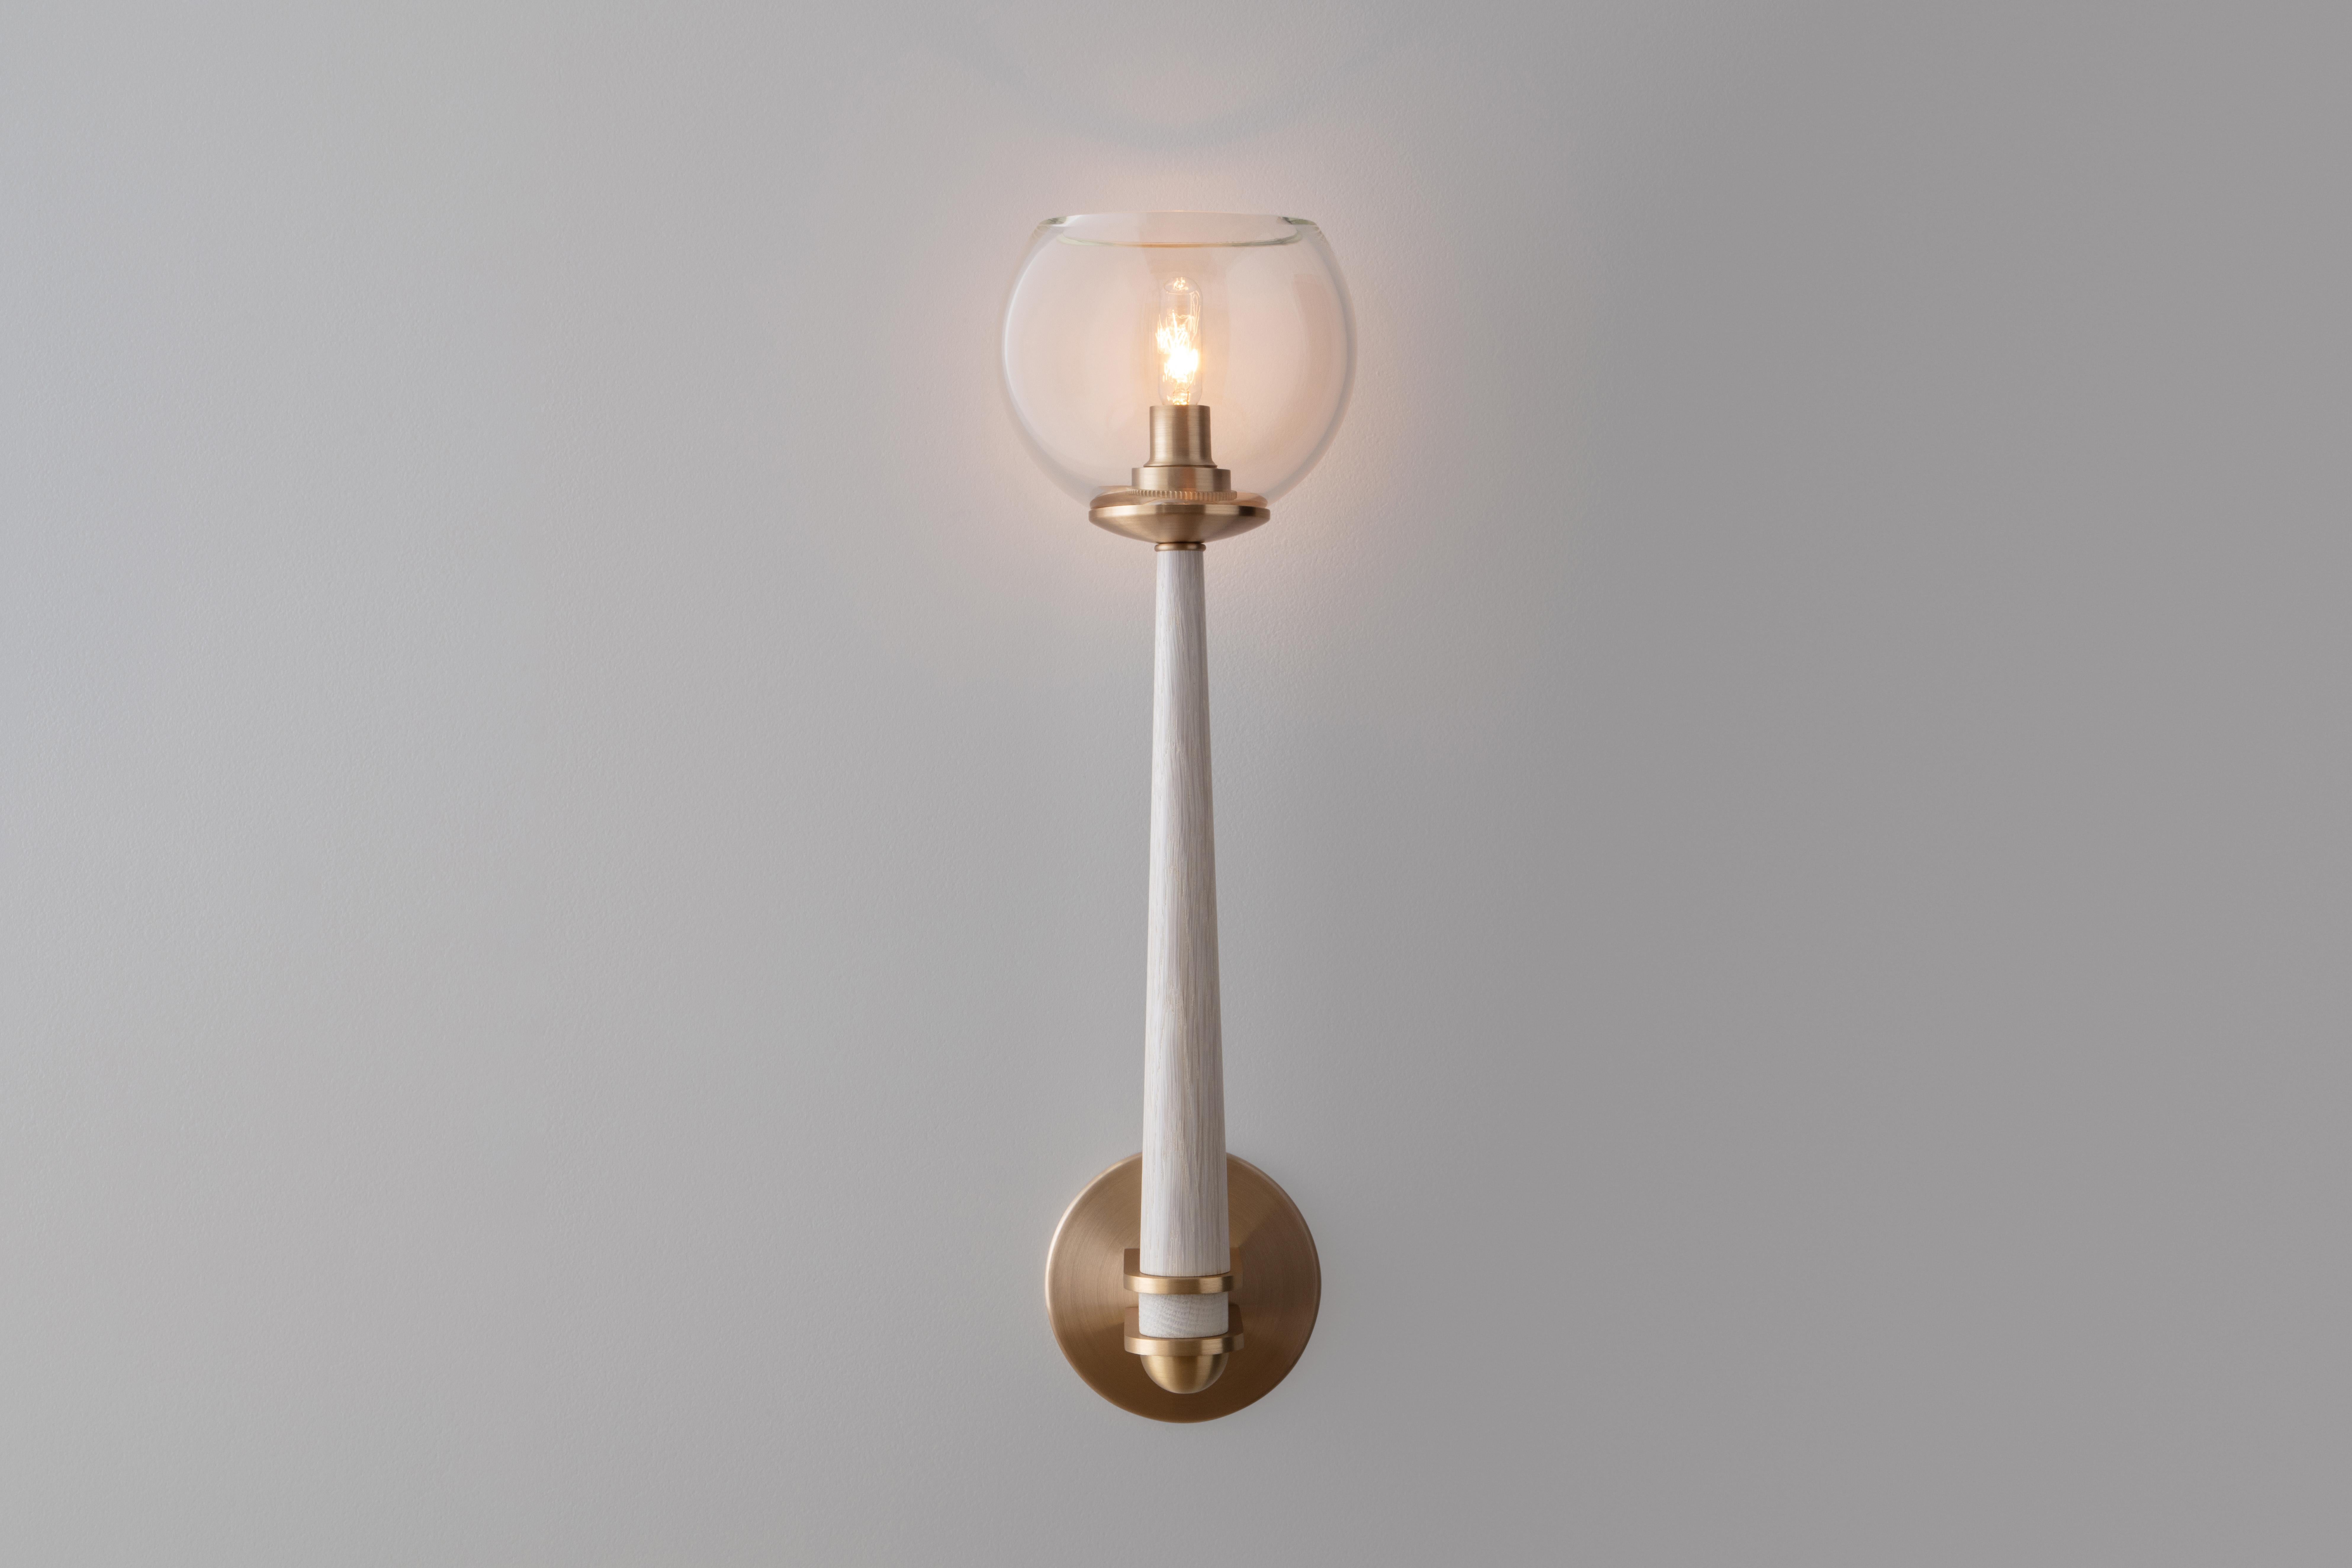 Mid-Century Modern Giotto Sconce (Classic) in Oak and Brass Finishes by Matthew Fairbank For Sale